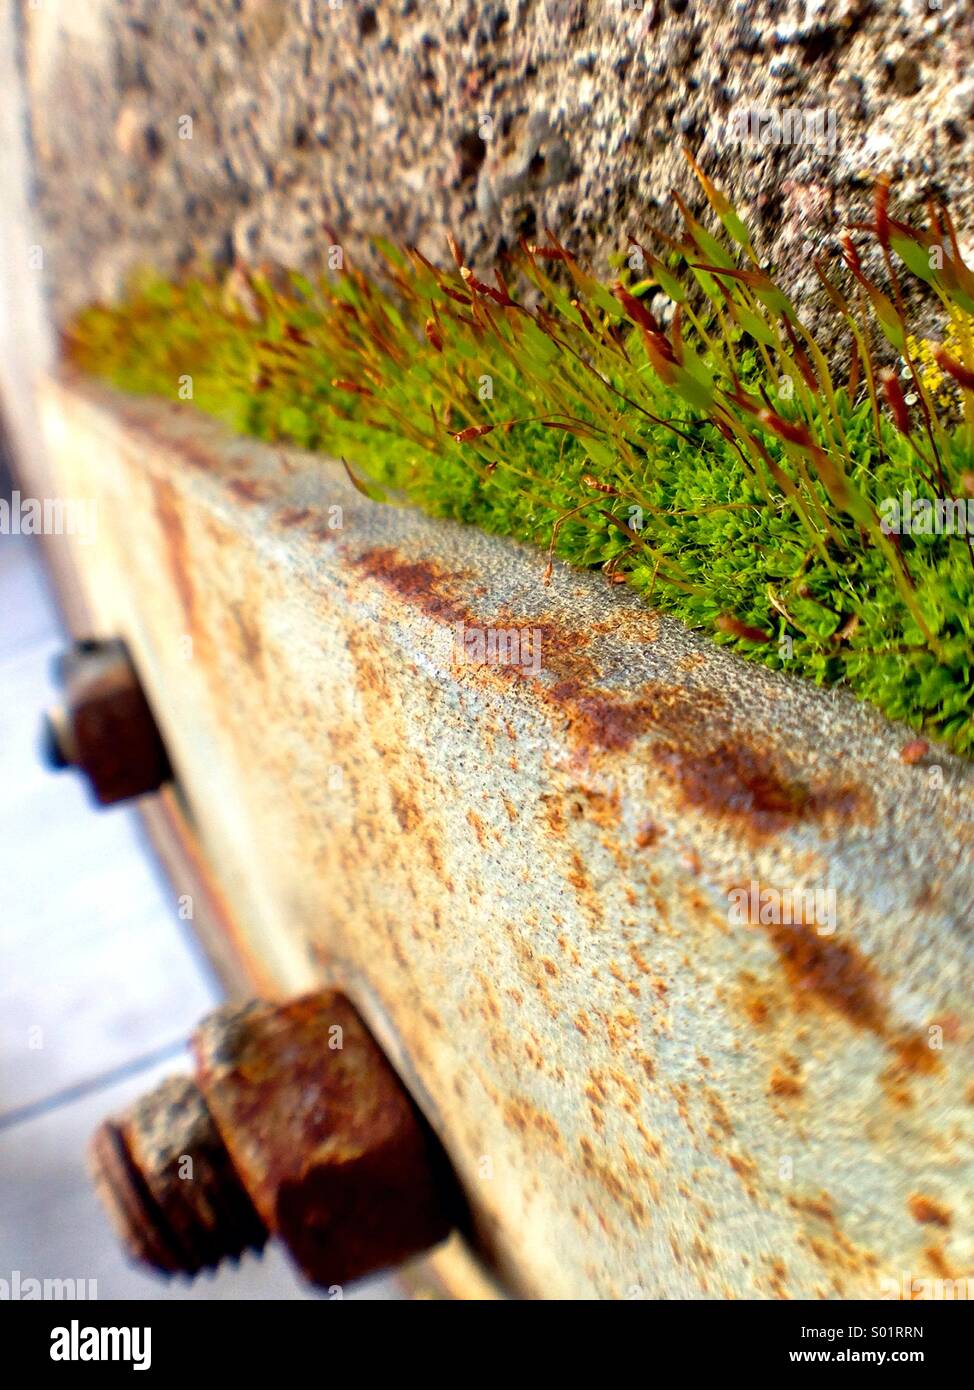 Moss in an industrial setting Stock Photo